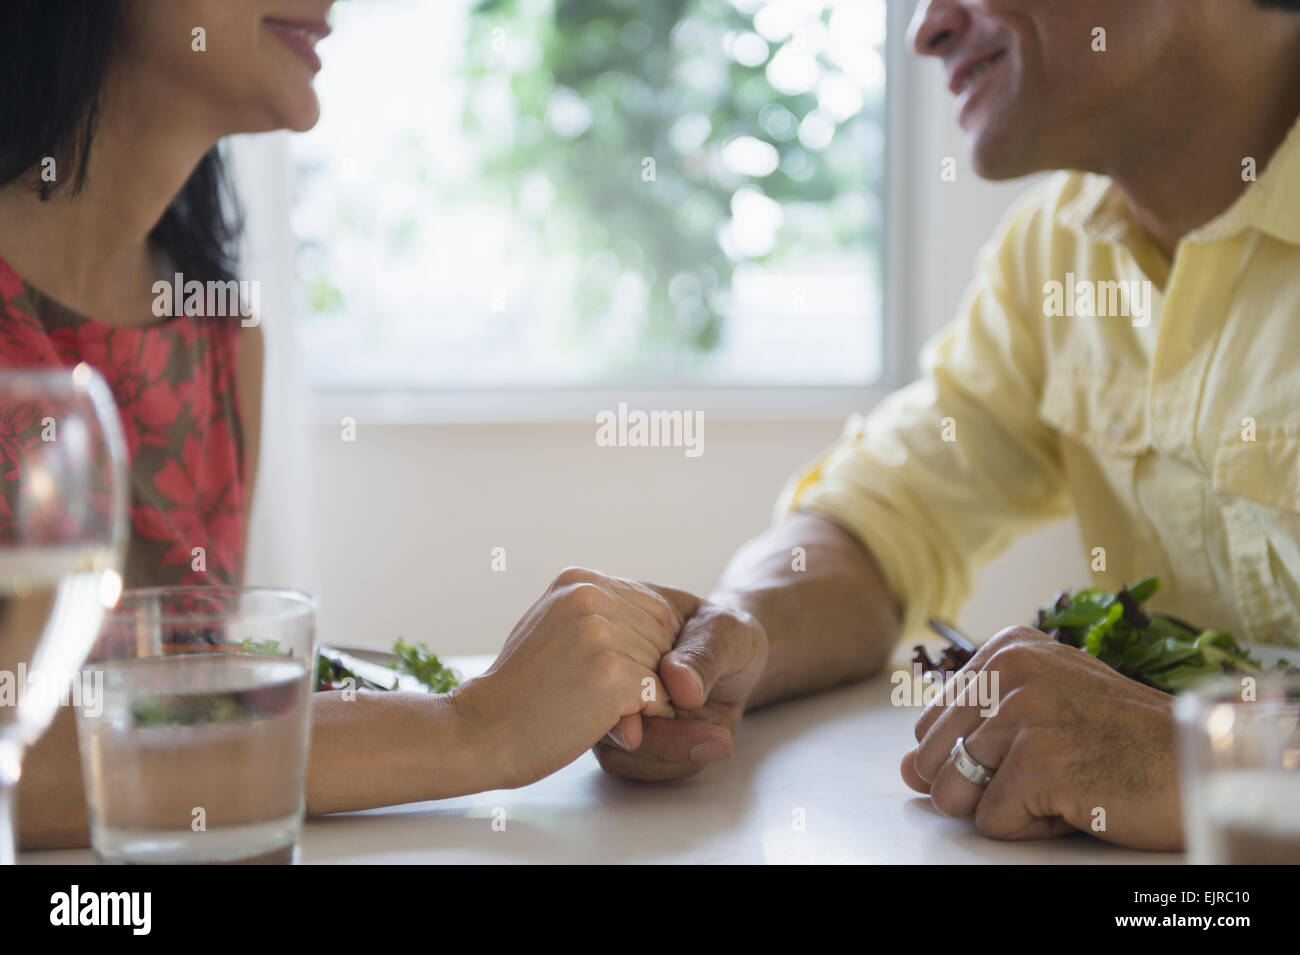 Couple holding hands in restaurant Banque D'Images